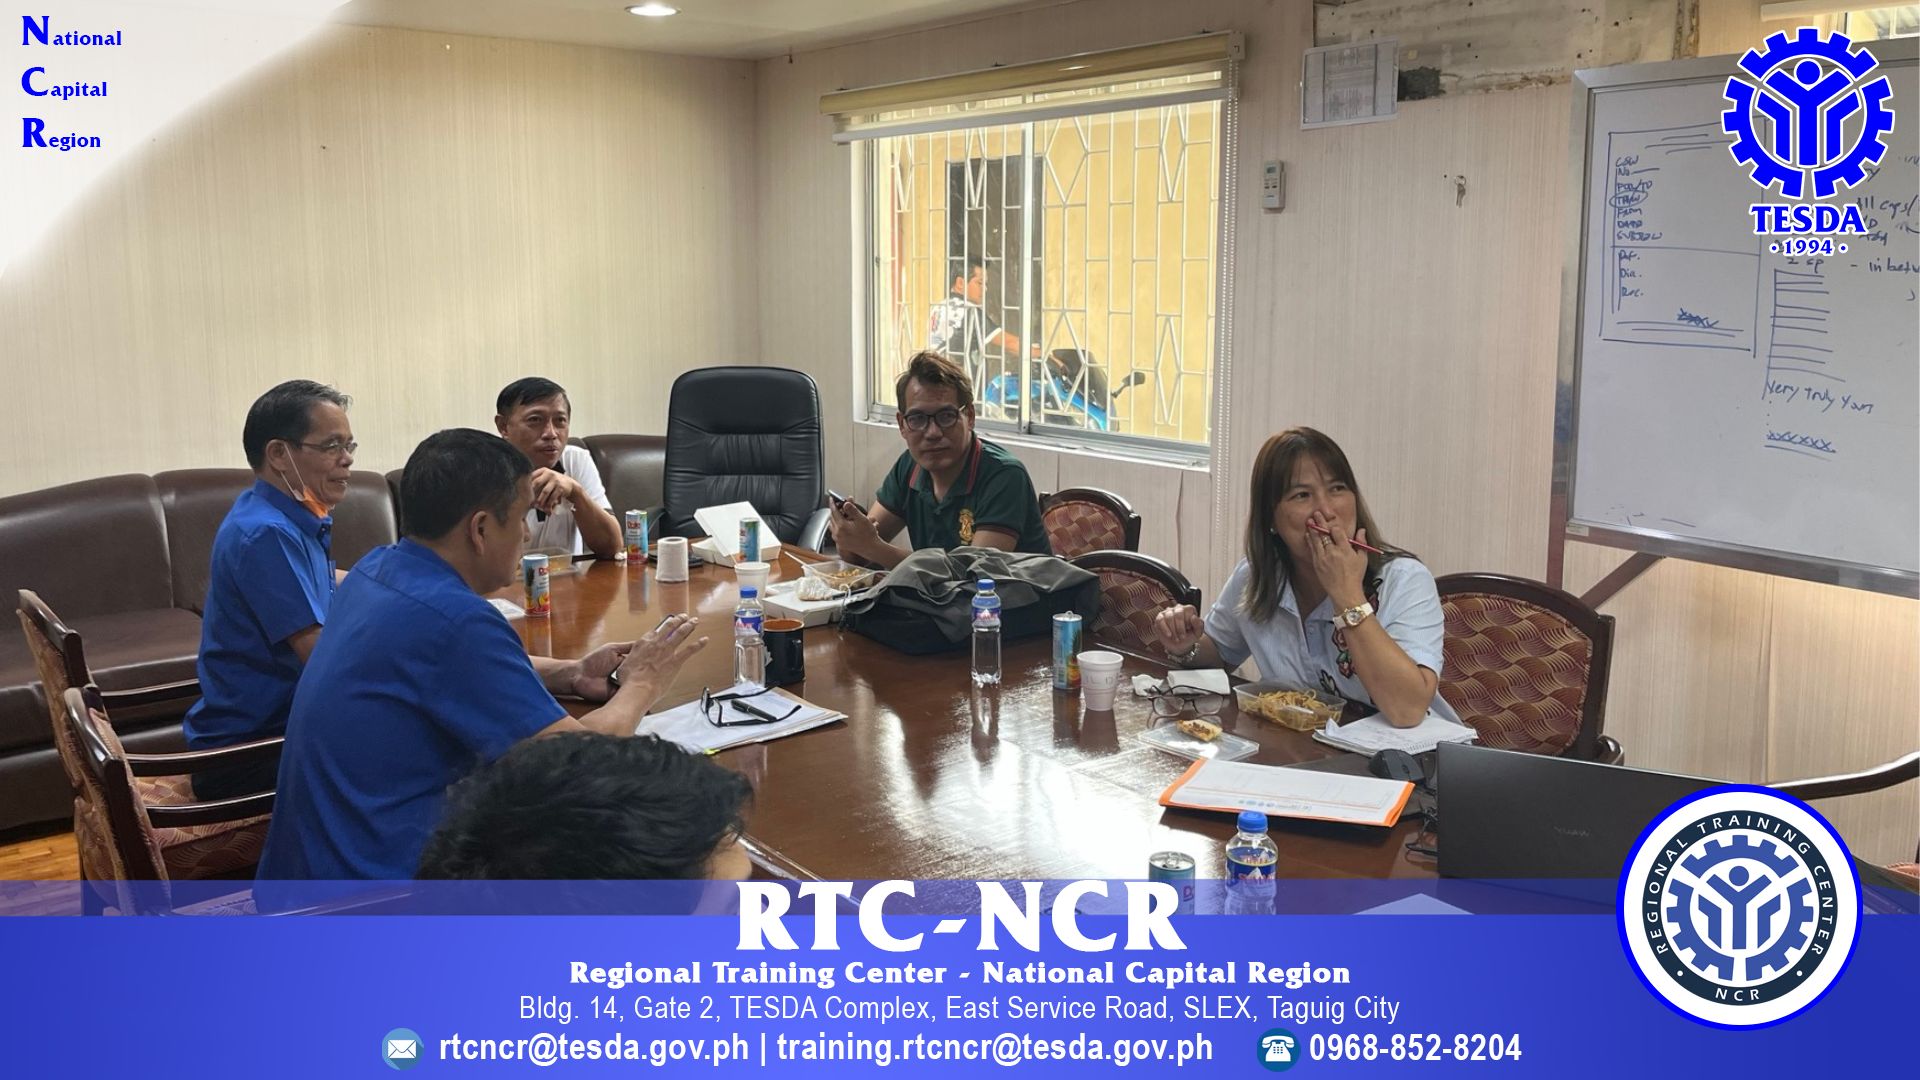 Planning workshop for the Cold Chain Innovation Hub for CY 2023 took place on January 30, 2023, at the RTC-NCR Facility.